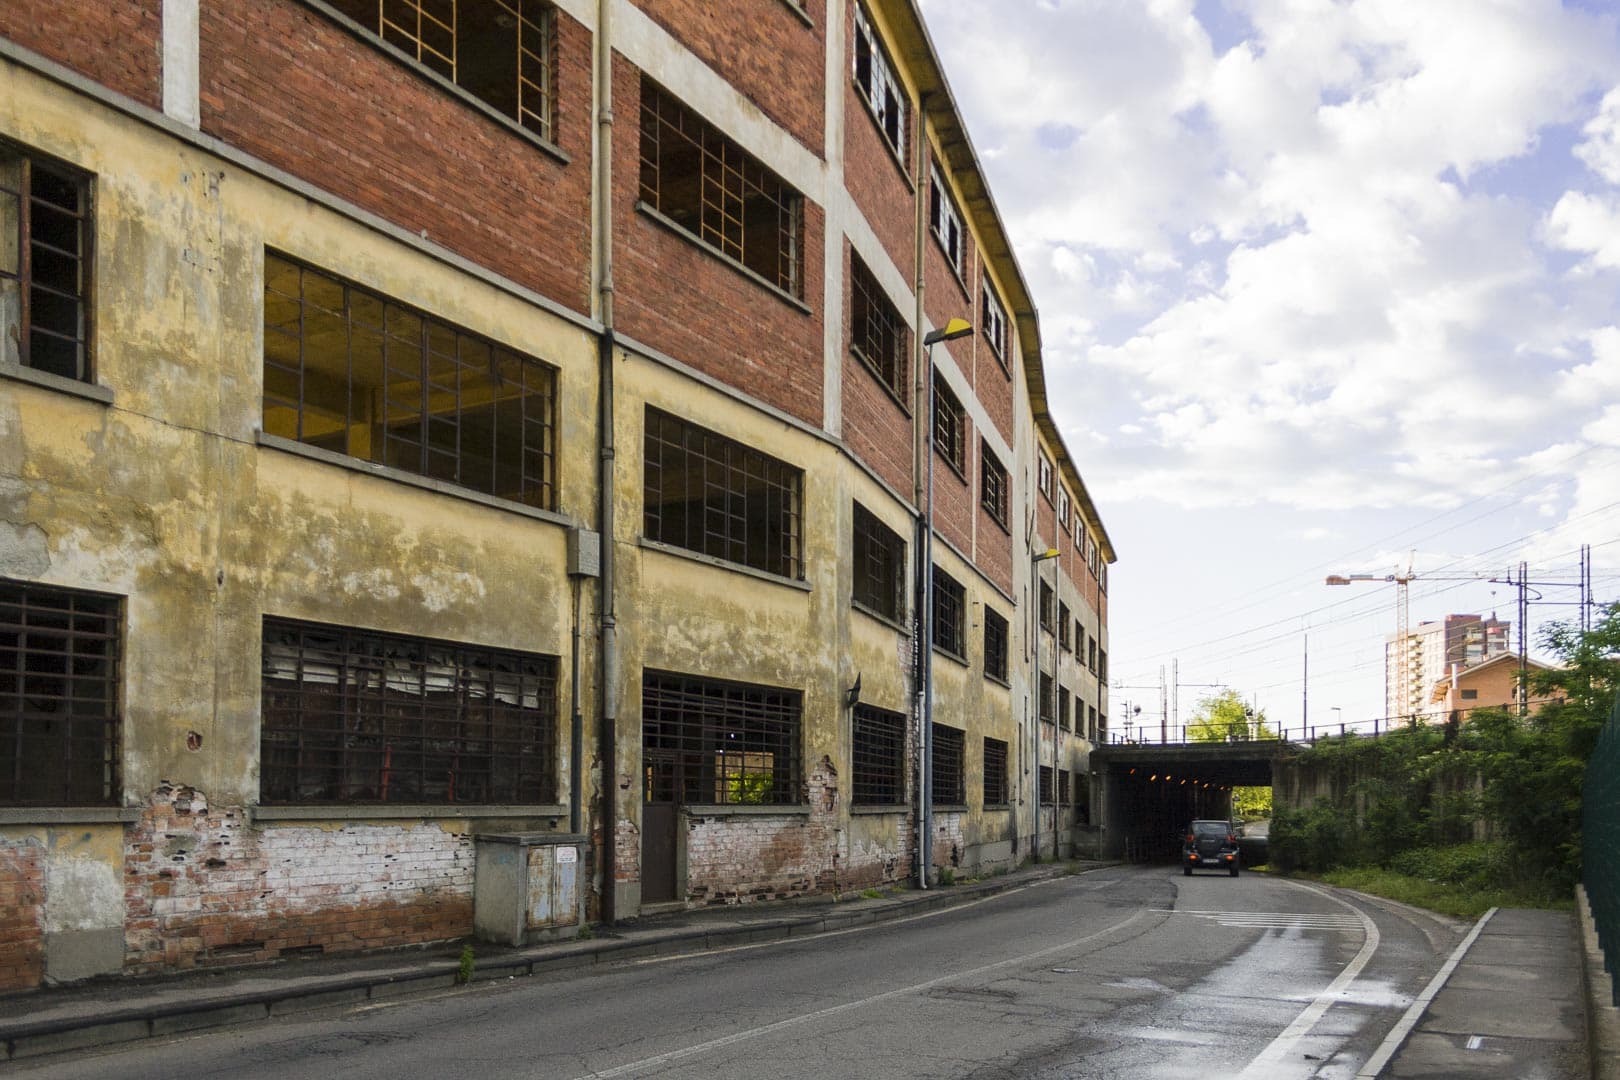 Garis – Abandoned Brakes Factory Outside View – Nichelino, Italy